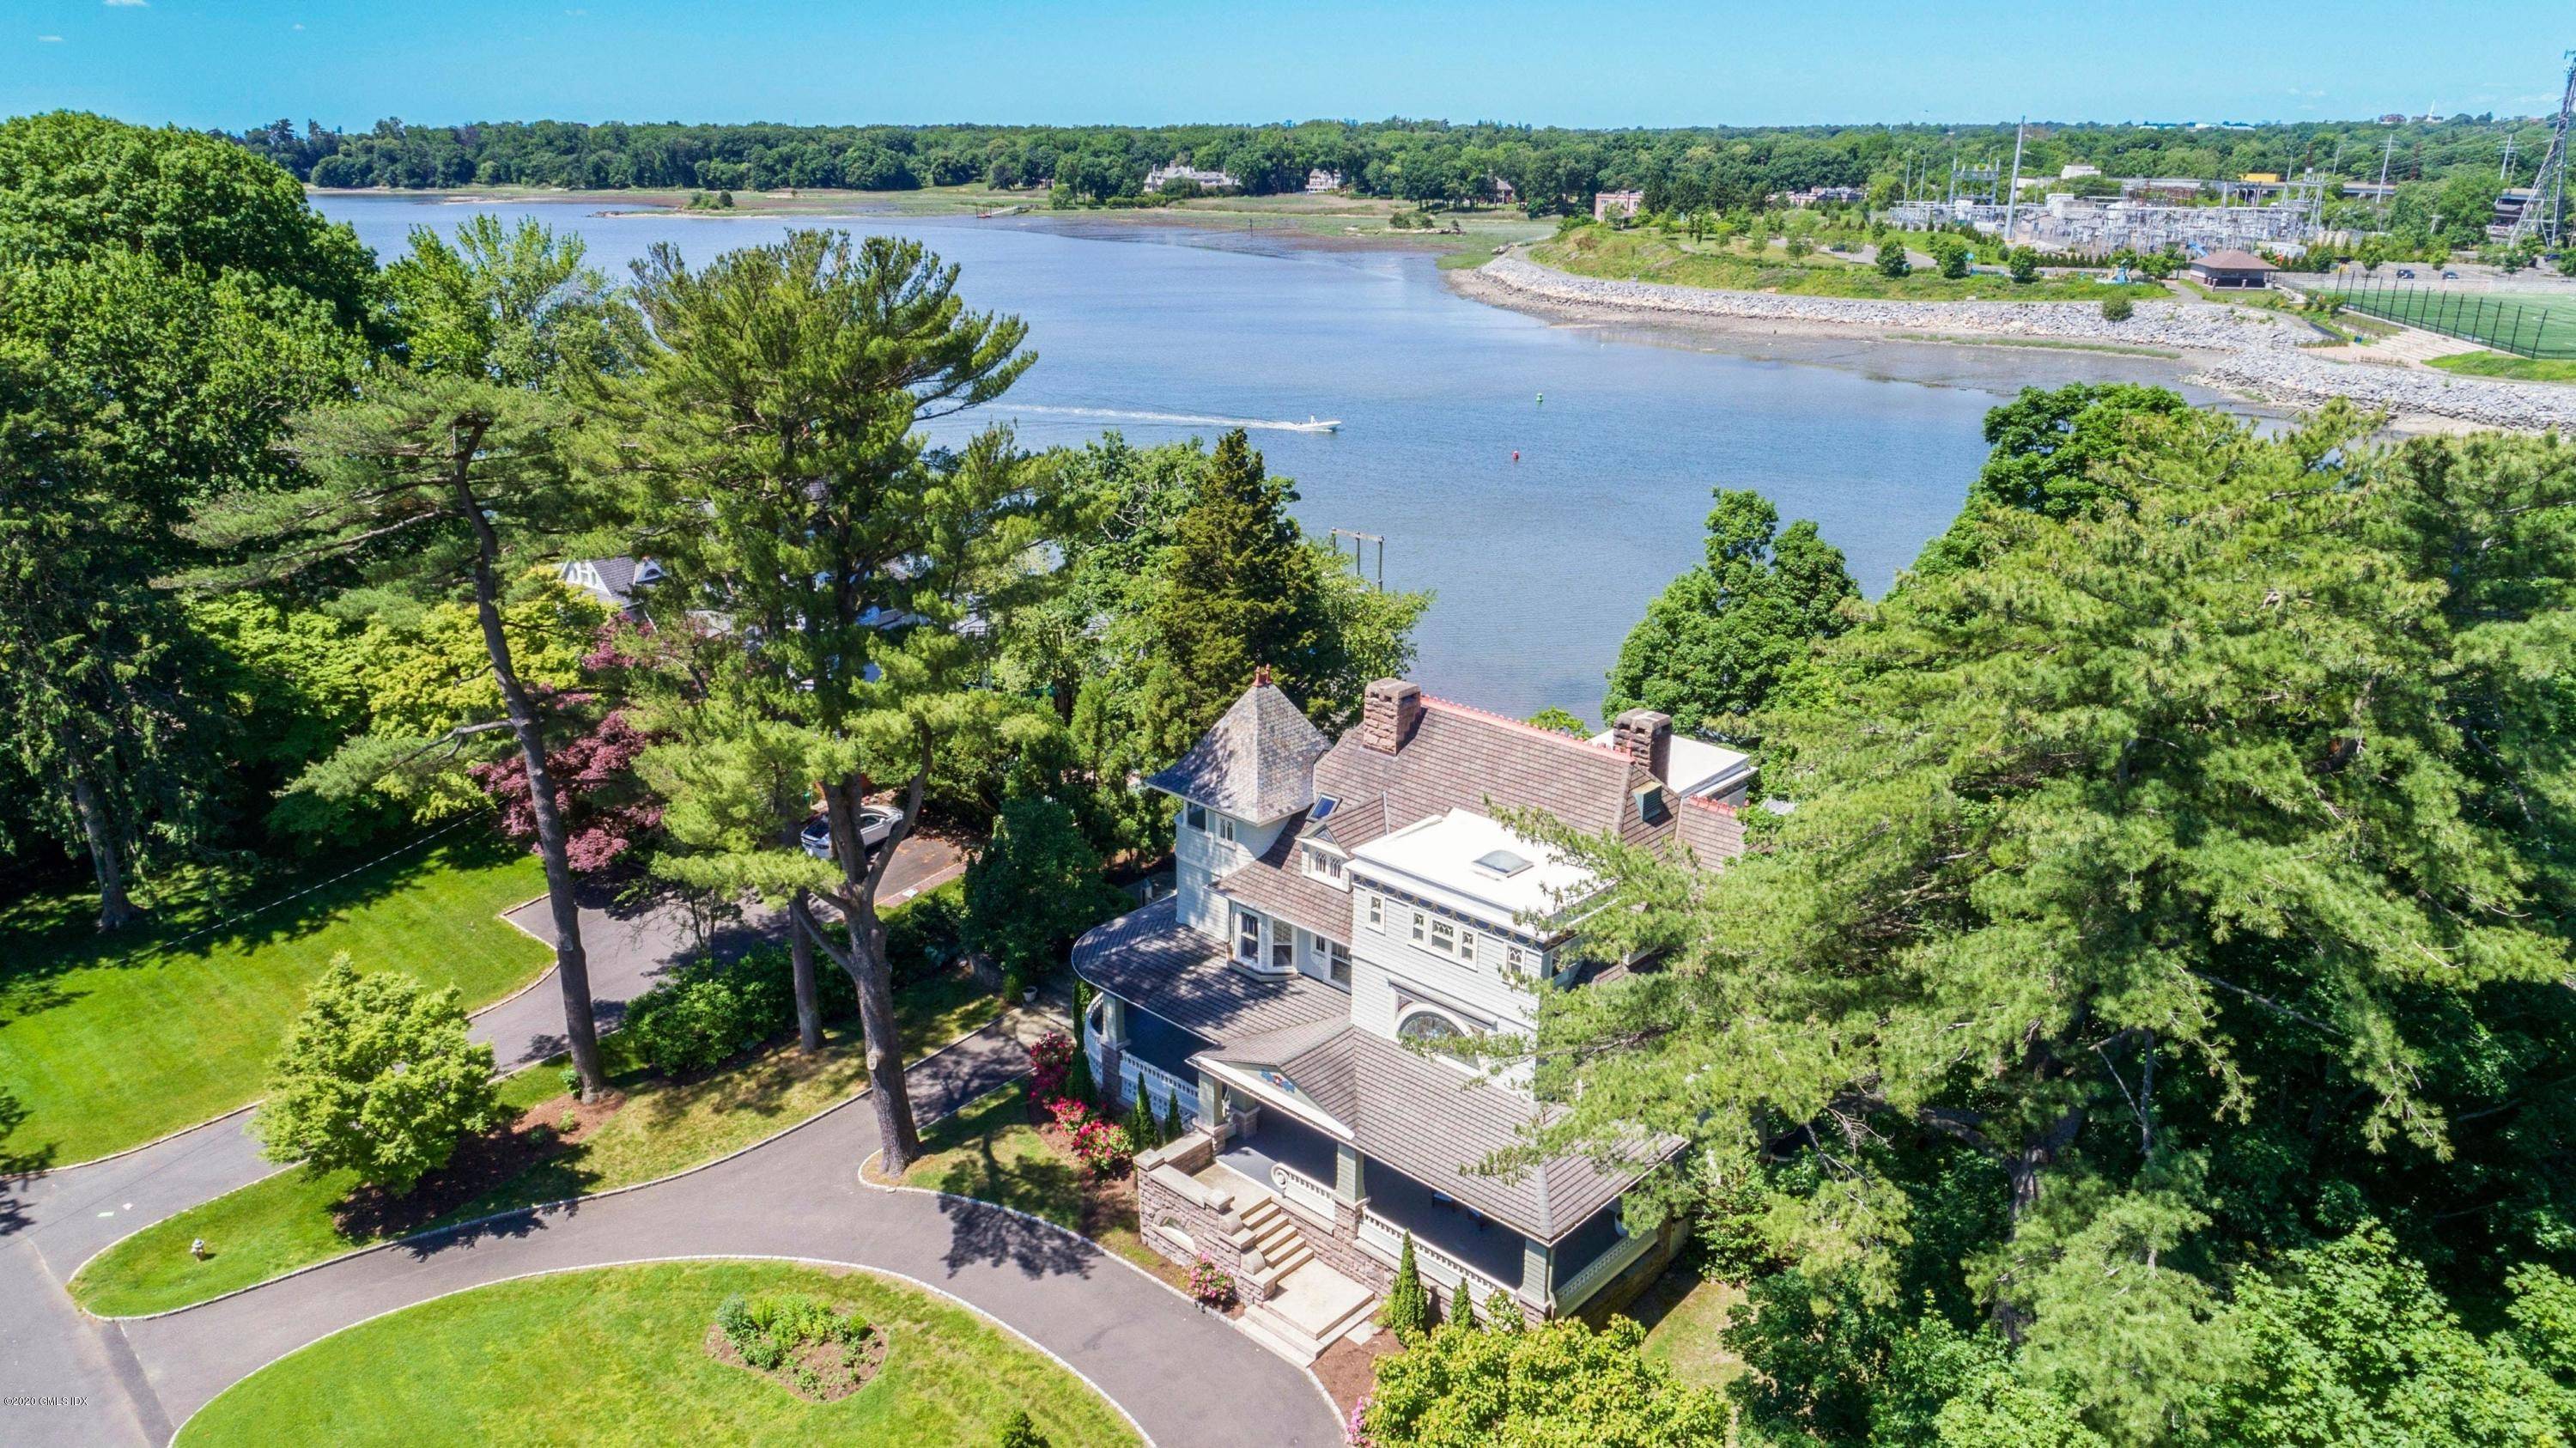 Majestic waterfront home high above the Cos Cob harbor.